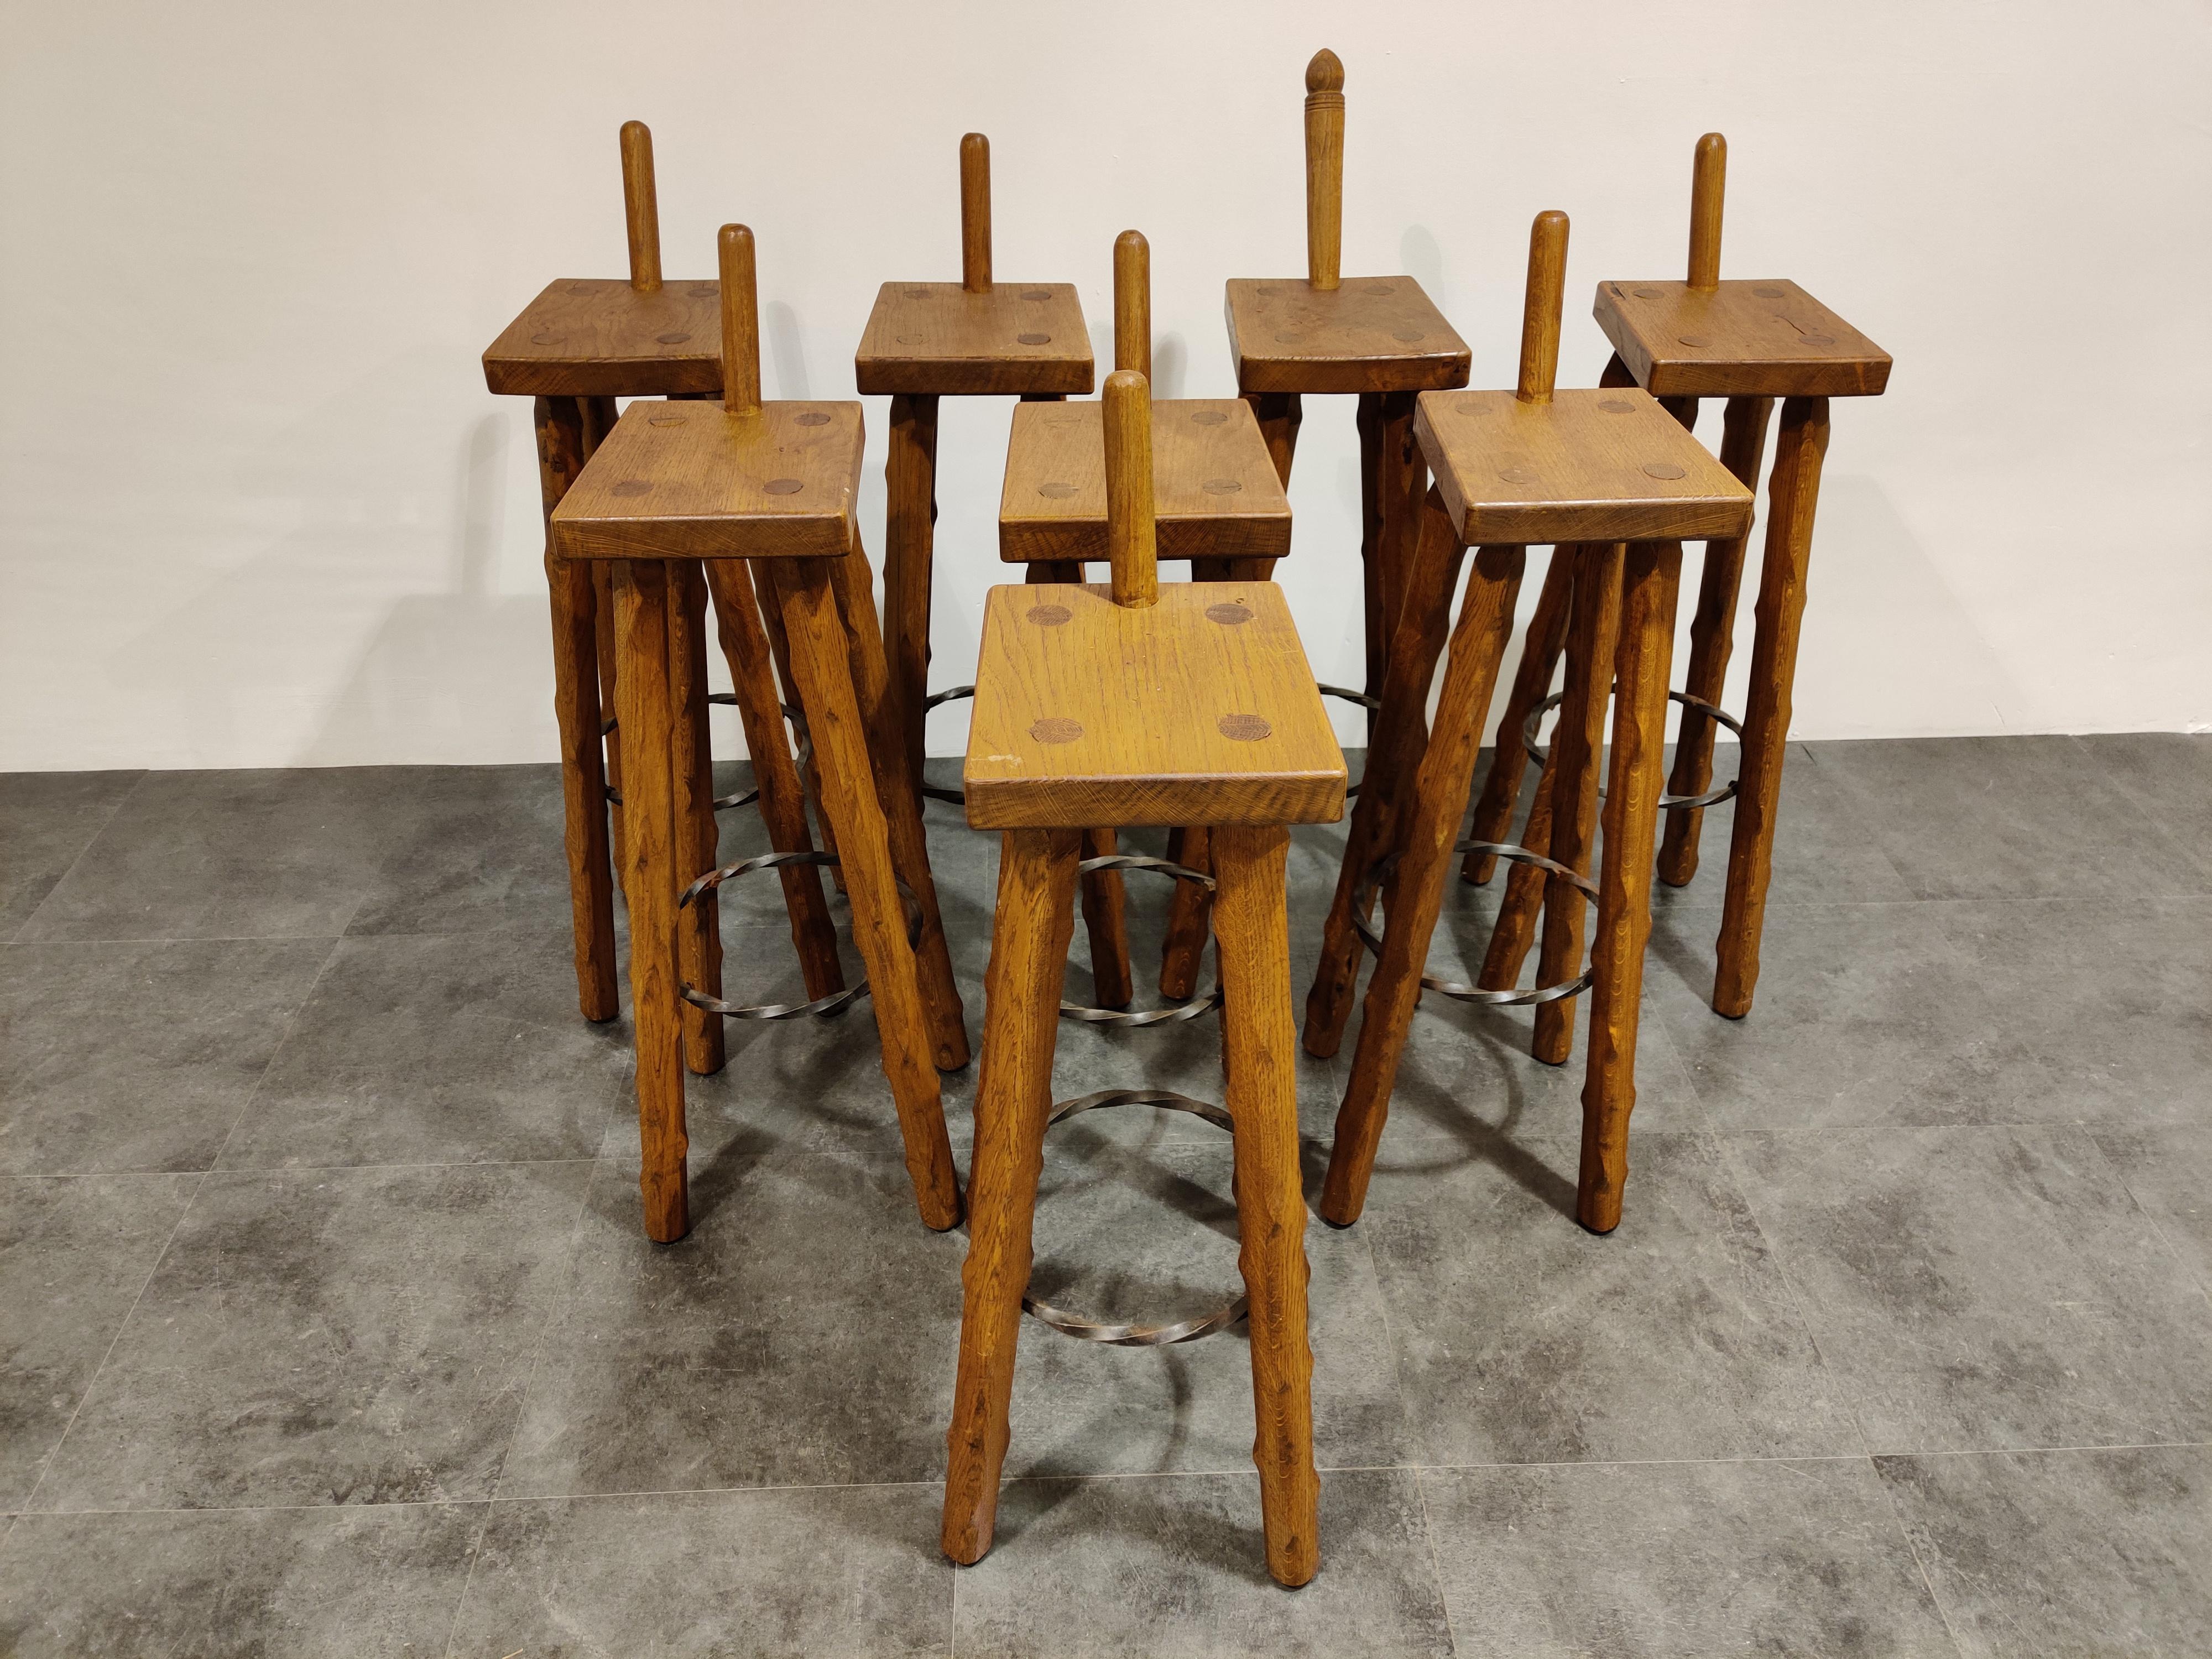 Beautiful handmade midcentury tripod bar stools with a twisted steel ring footrest and unique backrest.

Good original condition.

One of the stools has a different backrest but will be replaced by a as near identical as possible one

1950s -